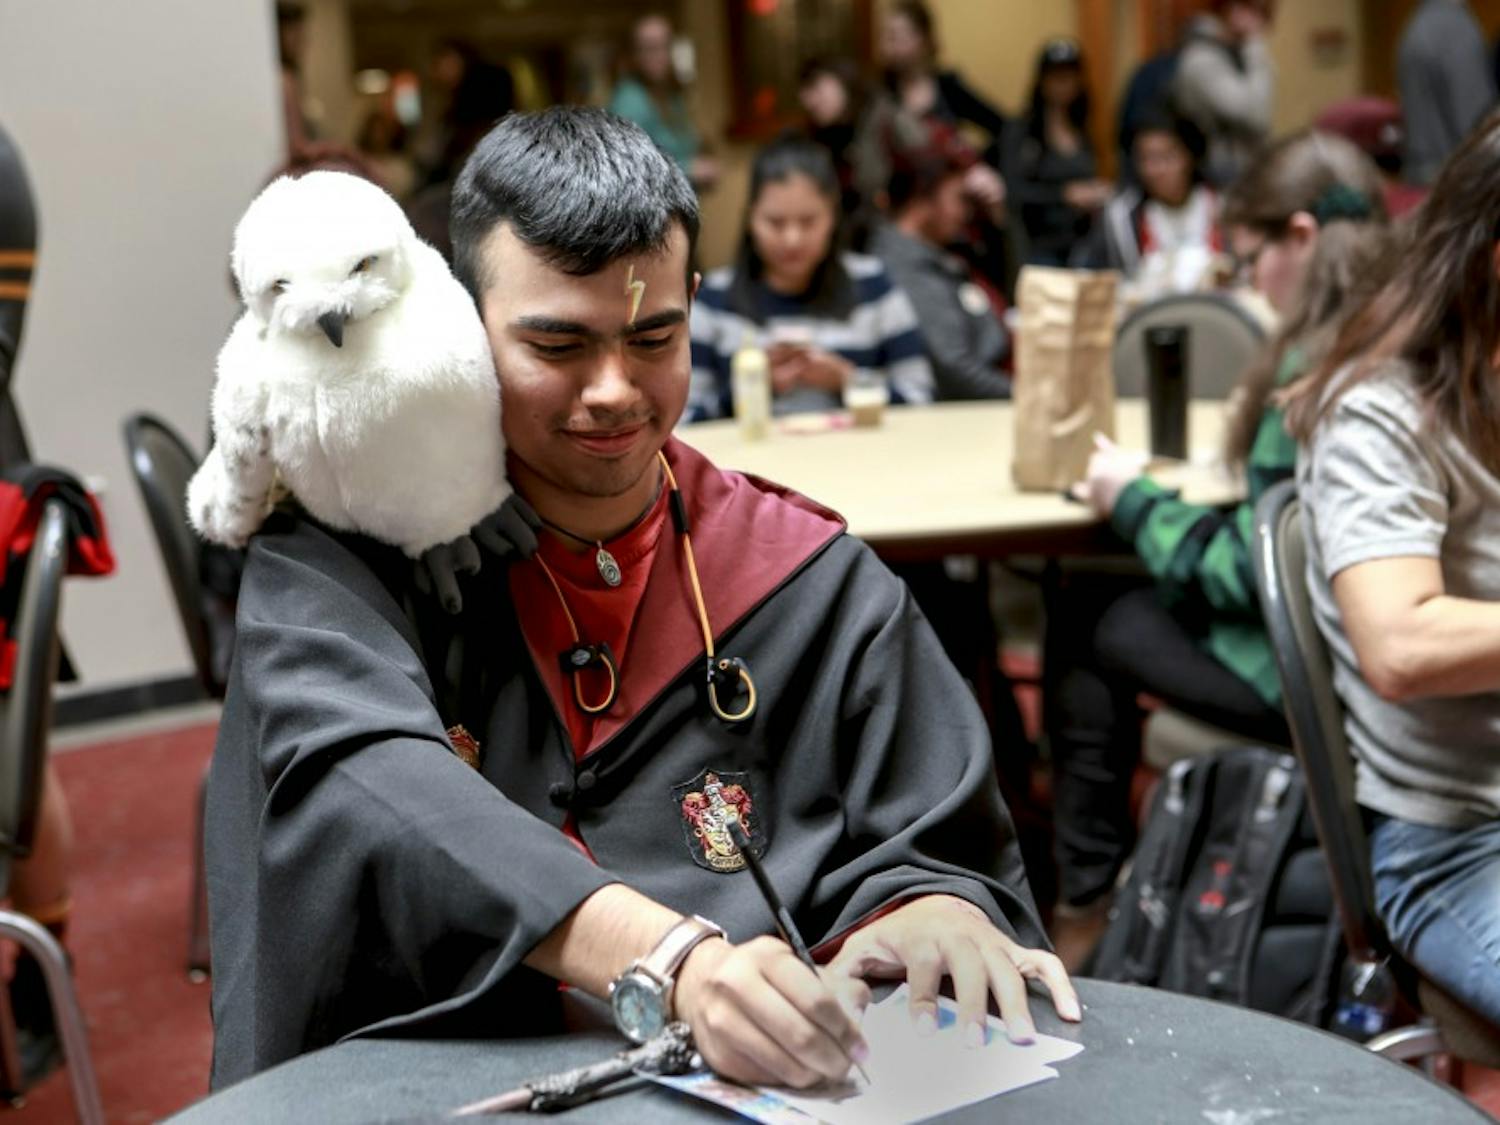 UNM student Noah Tijerina celebrates Harry Potter Day at UNM by dressing up in a Hogwarts gown on November 21, 2017.
